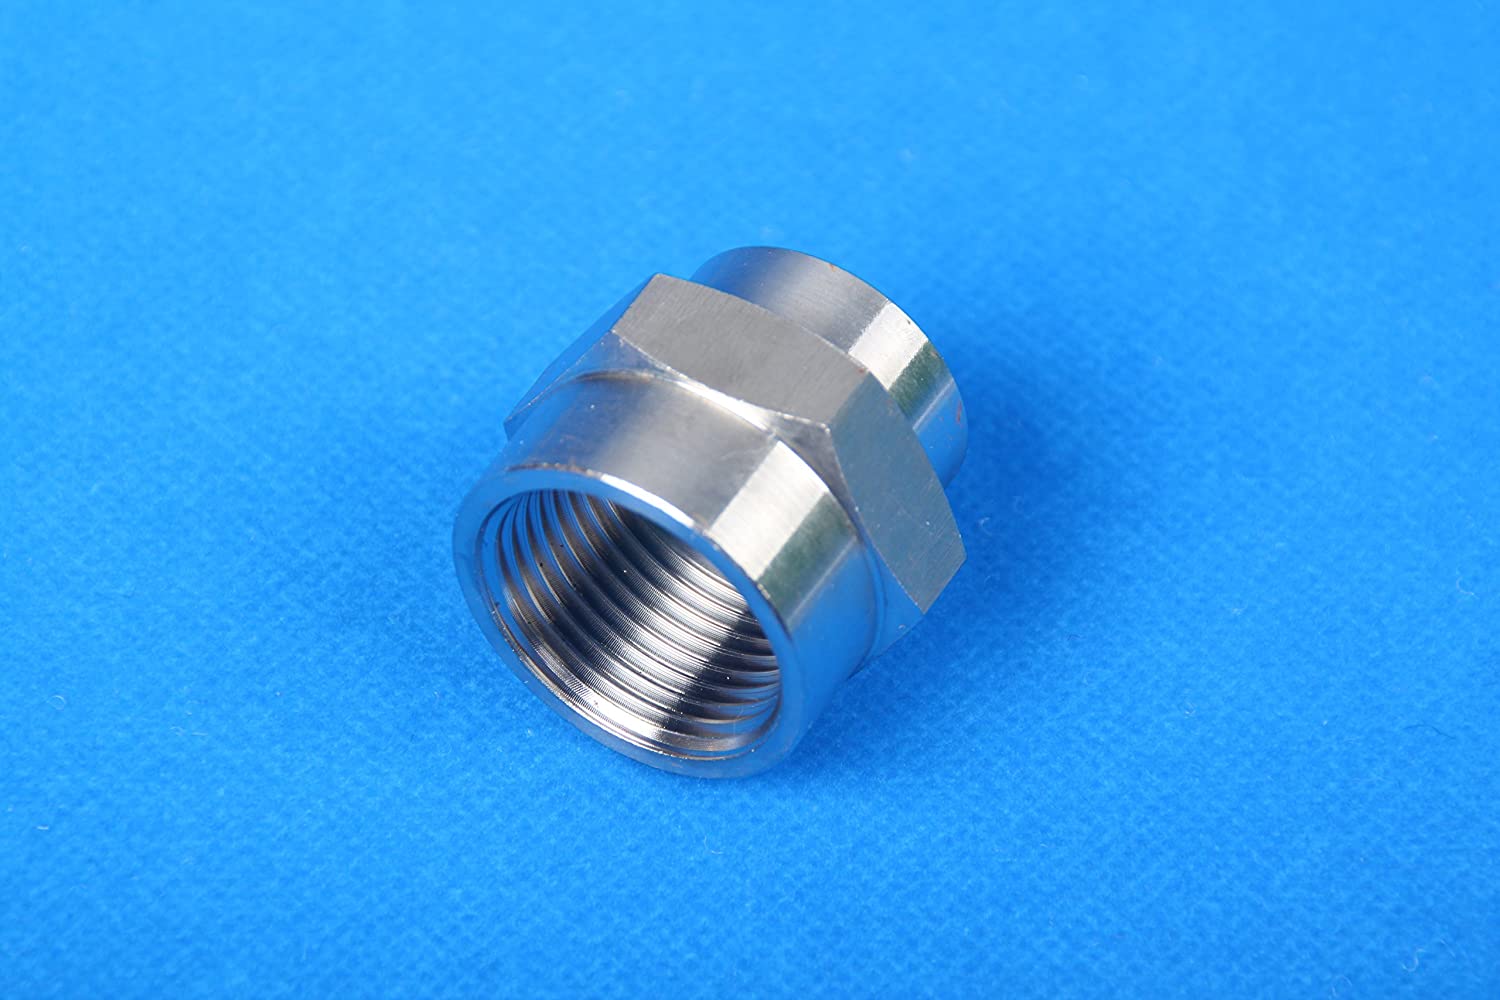 LTWFITTING Bar Production Stainless Steel 316 Pipe Fitting 3/4 Inch x 1/2 Inch Female NPT Reducing Coupling Water Boat (Pack of 5)